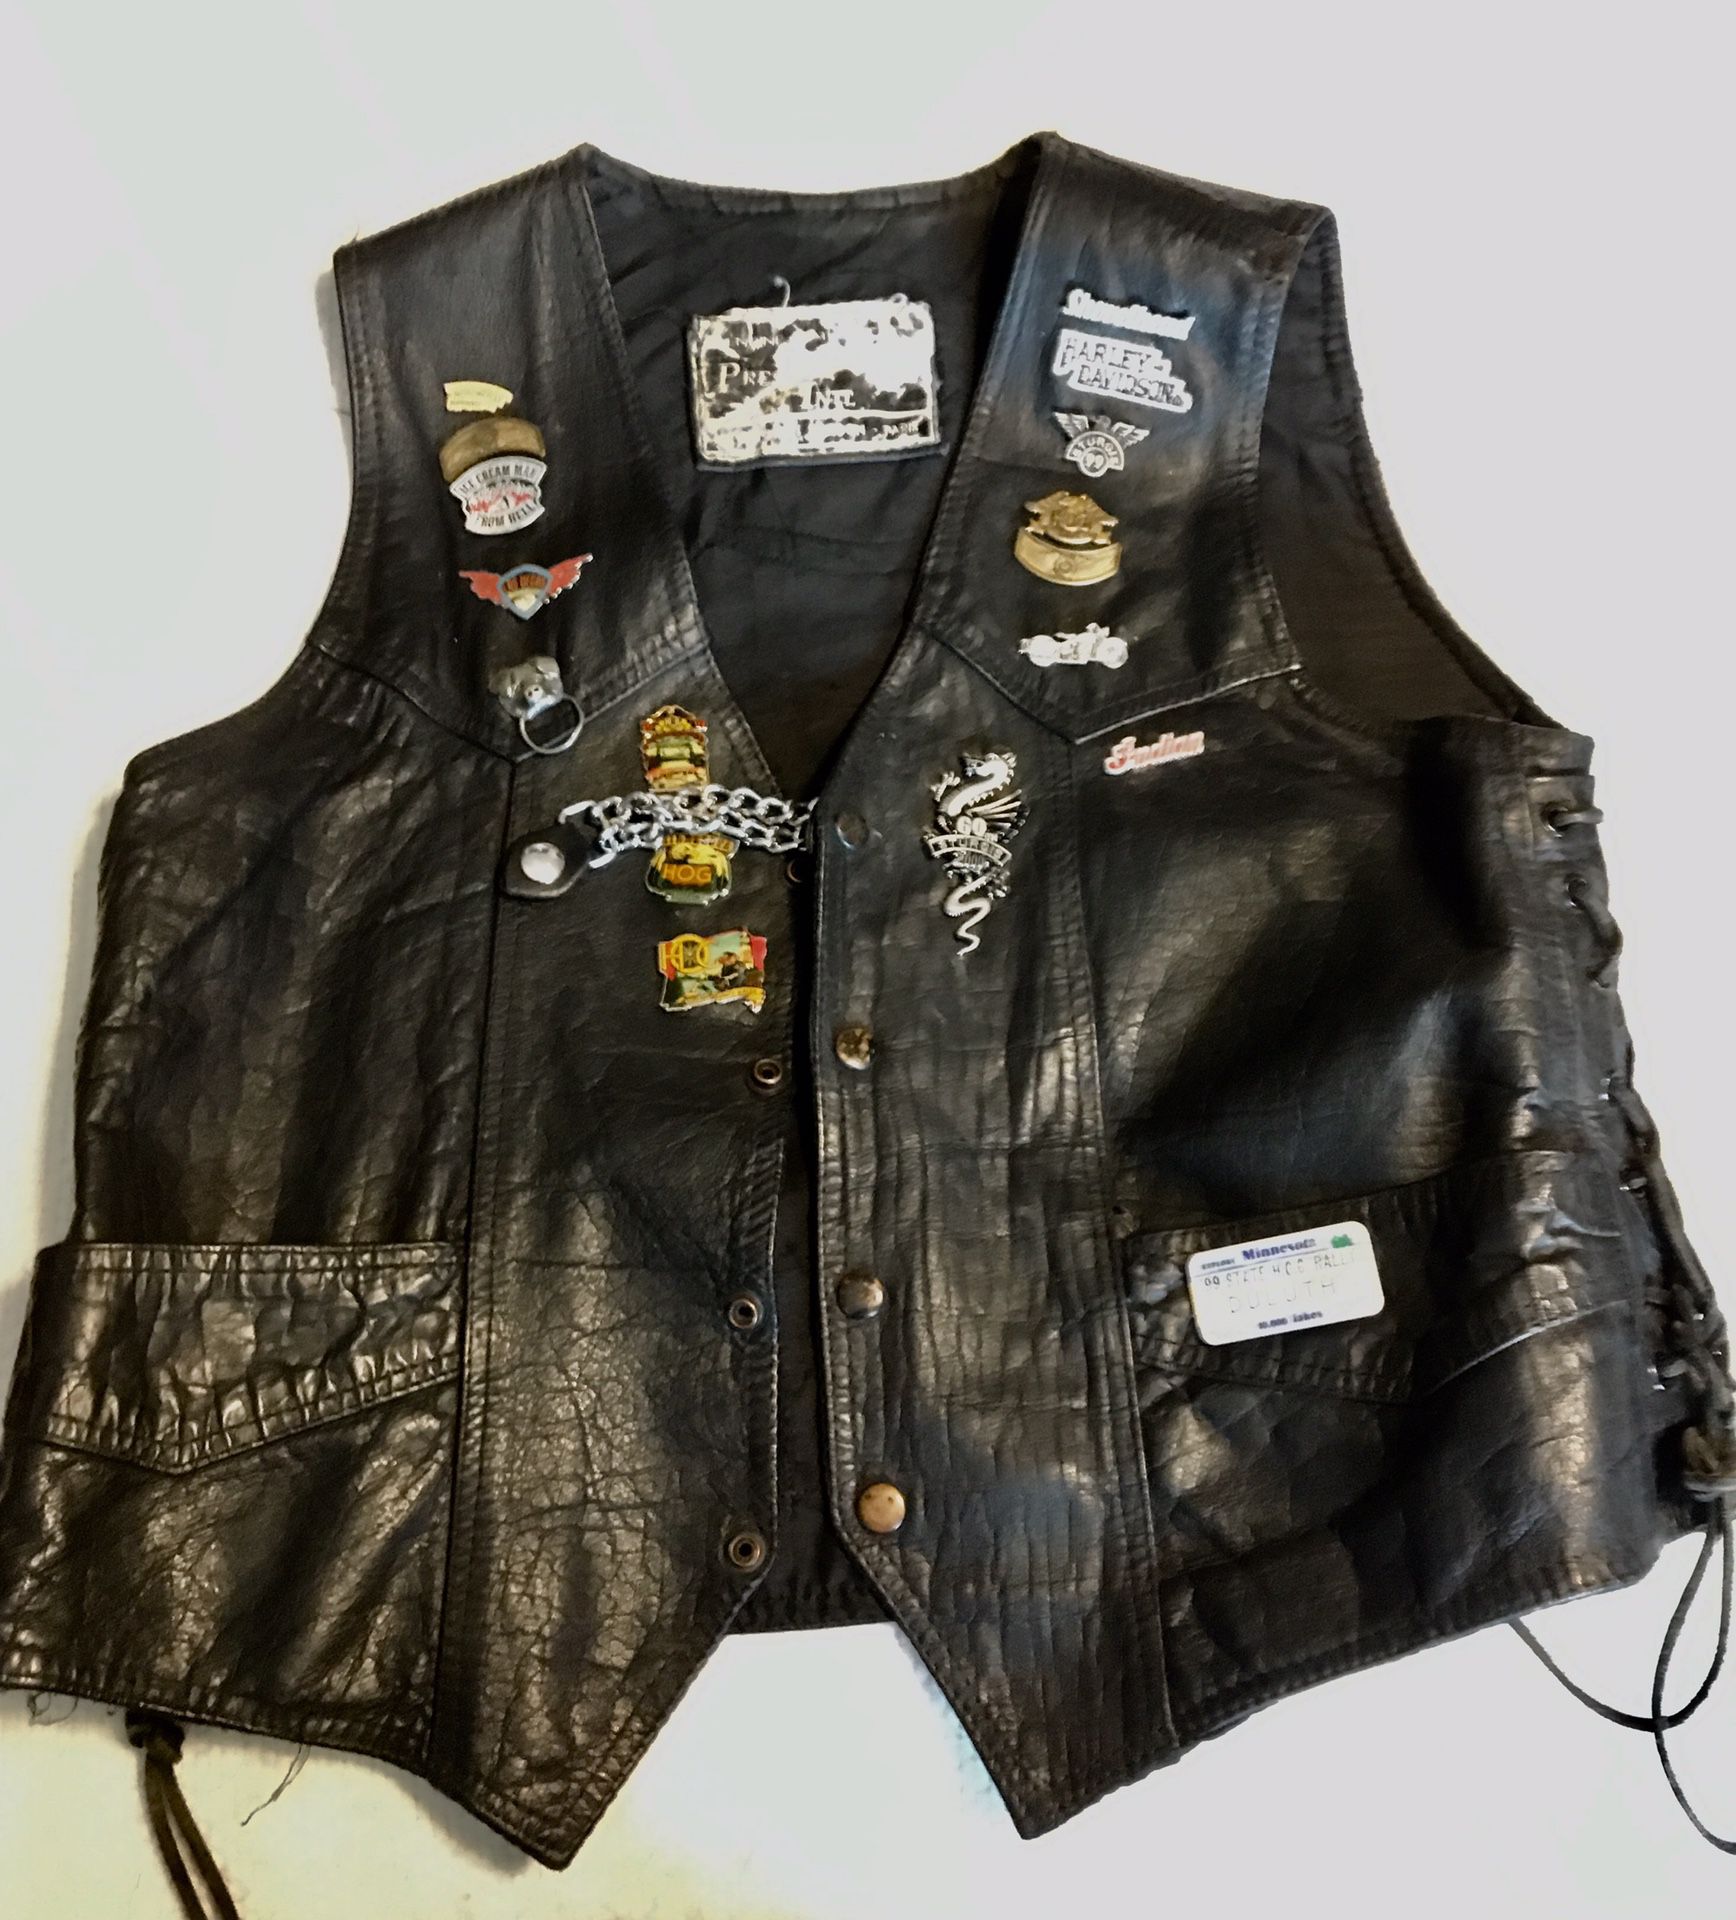 Heavyweight LEATHER BIKER VEST Riding Gear Size Med, LG or XL includes Pins m